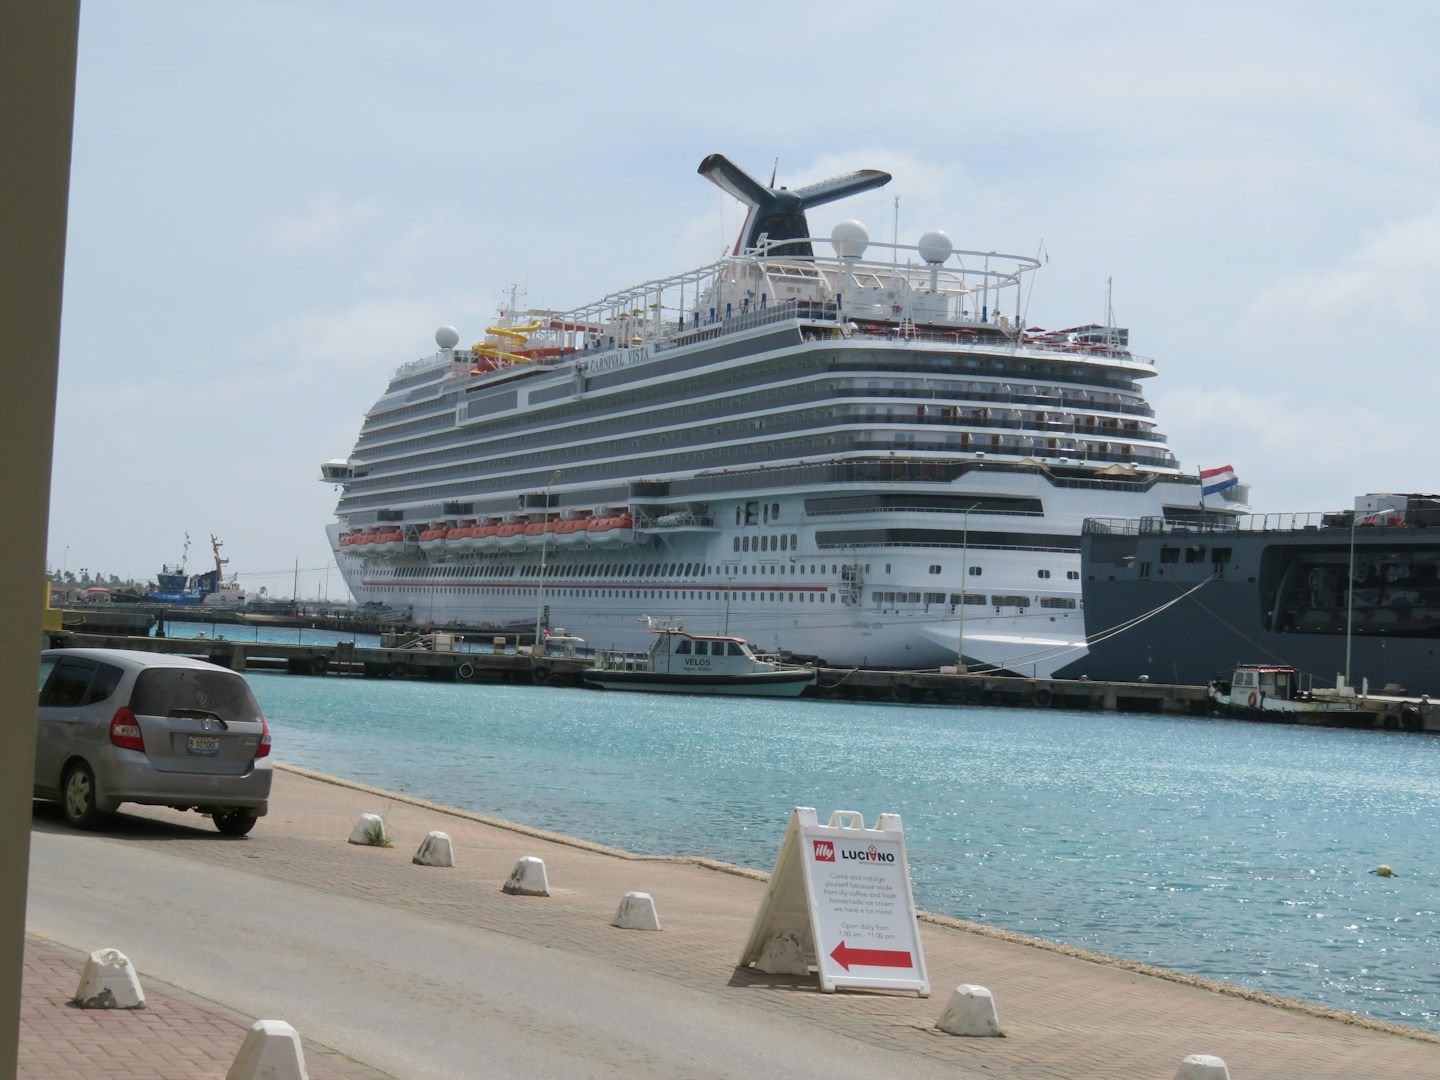 View of our ship while docked in Bonaire.